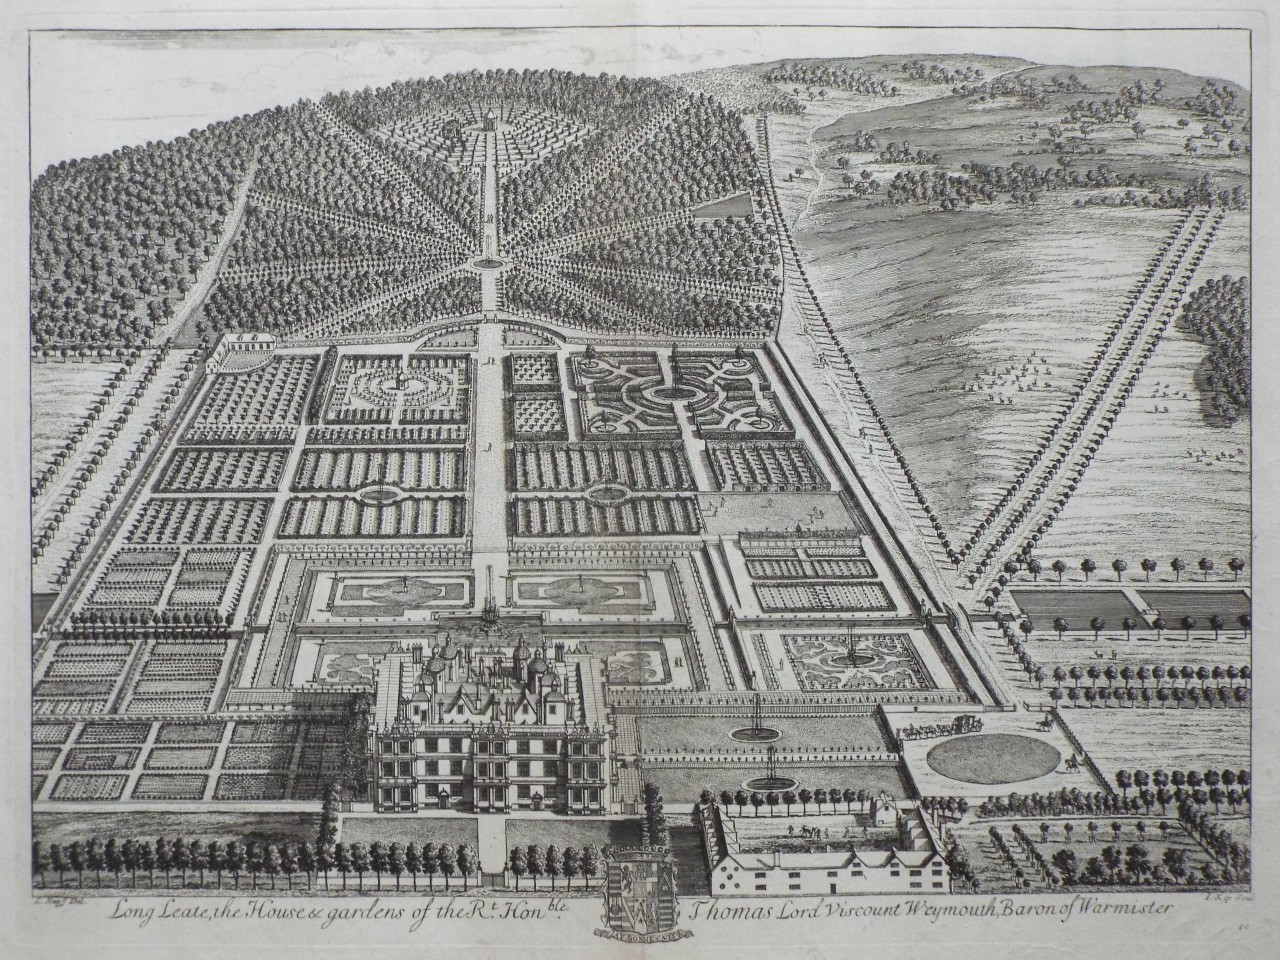 Print - Long Leate, the House & gardens of the Rt. Honble. Thomas Lord Viscount Weymouth, Baron of Warminster - Kip